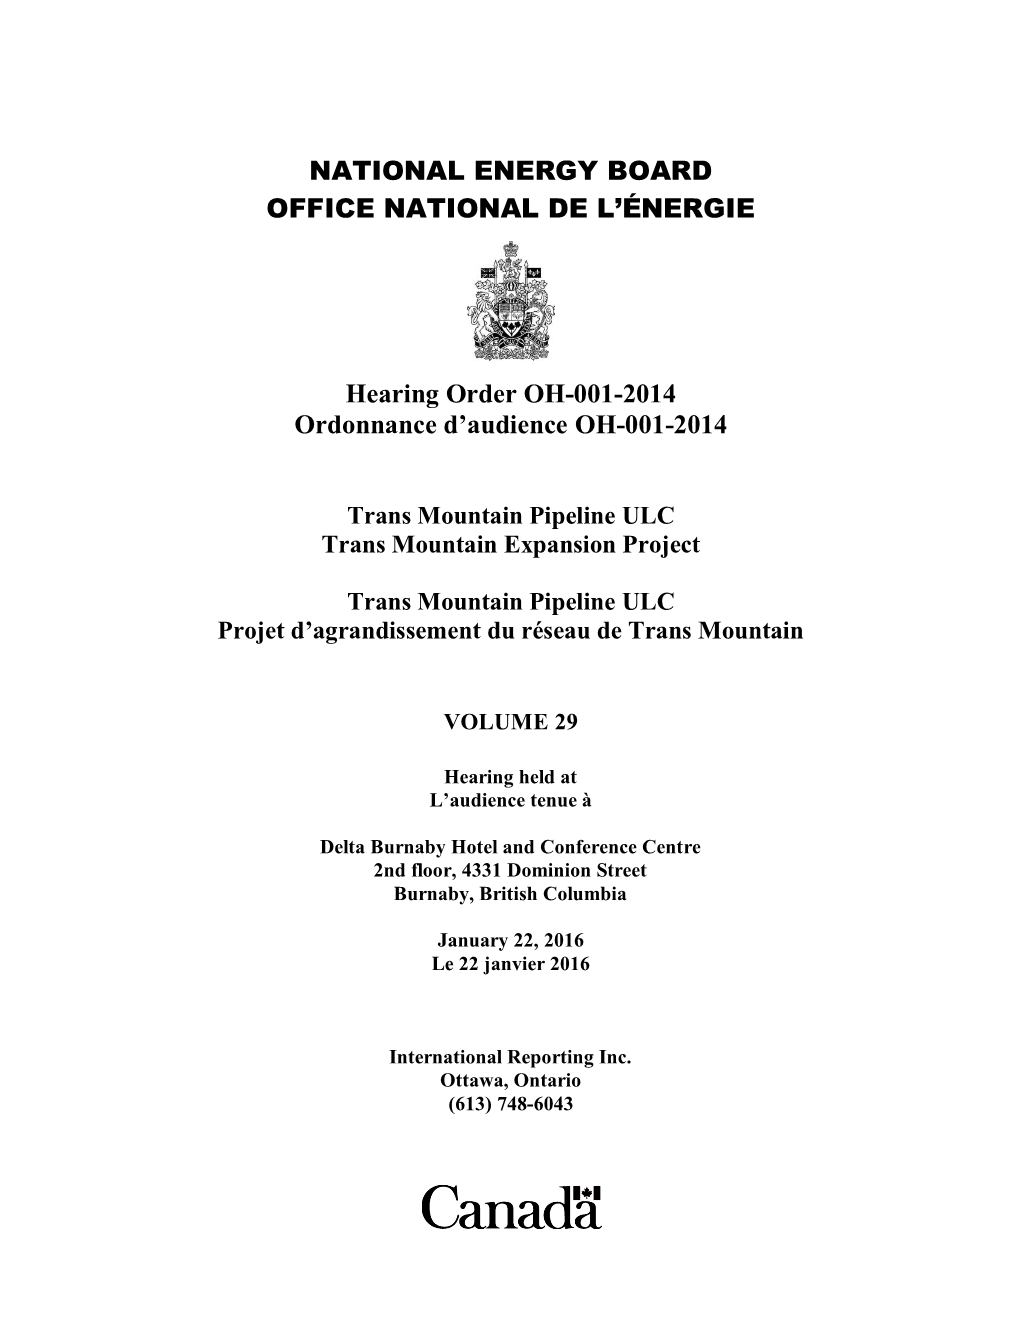 NEB Trans Mountain Pipeline Expansion Hearing Transcripts, Vol